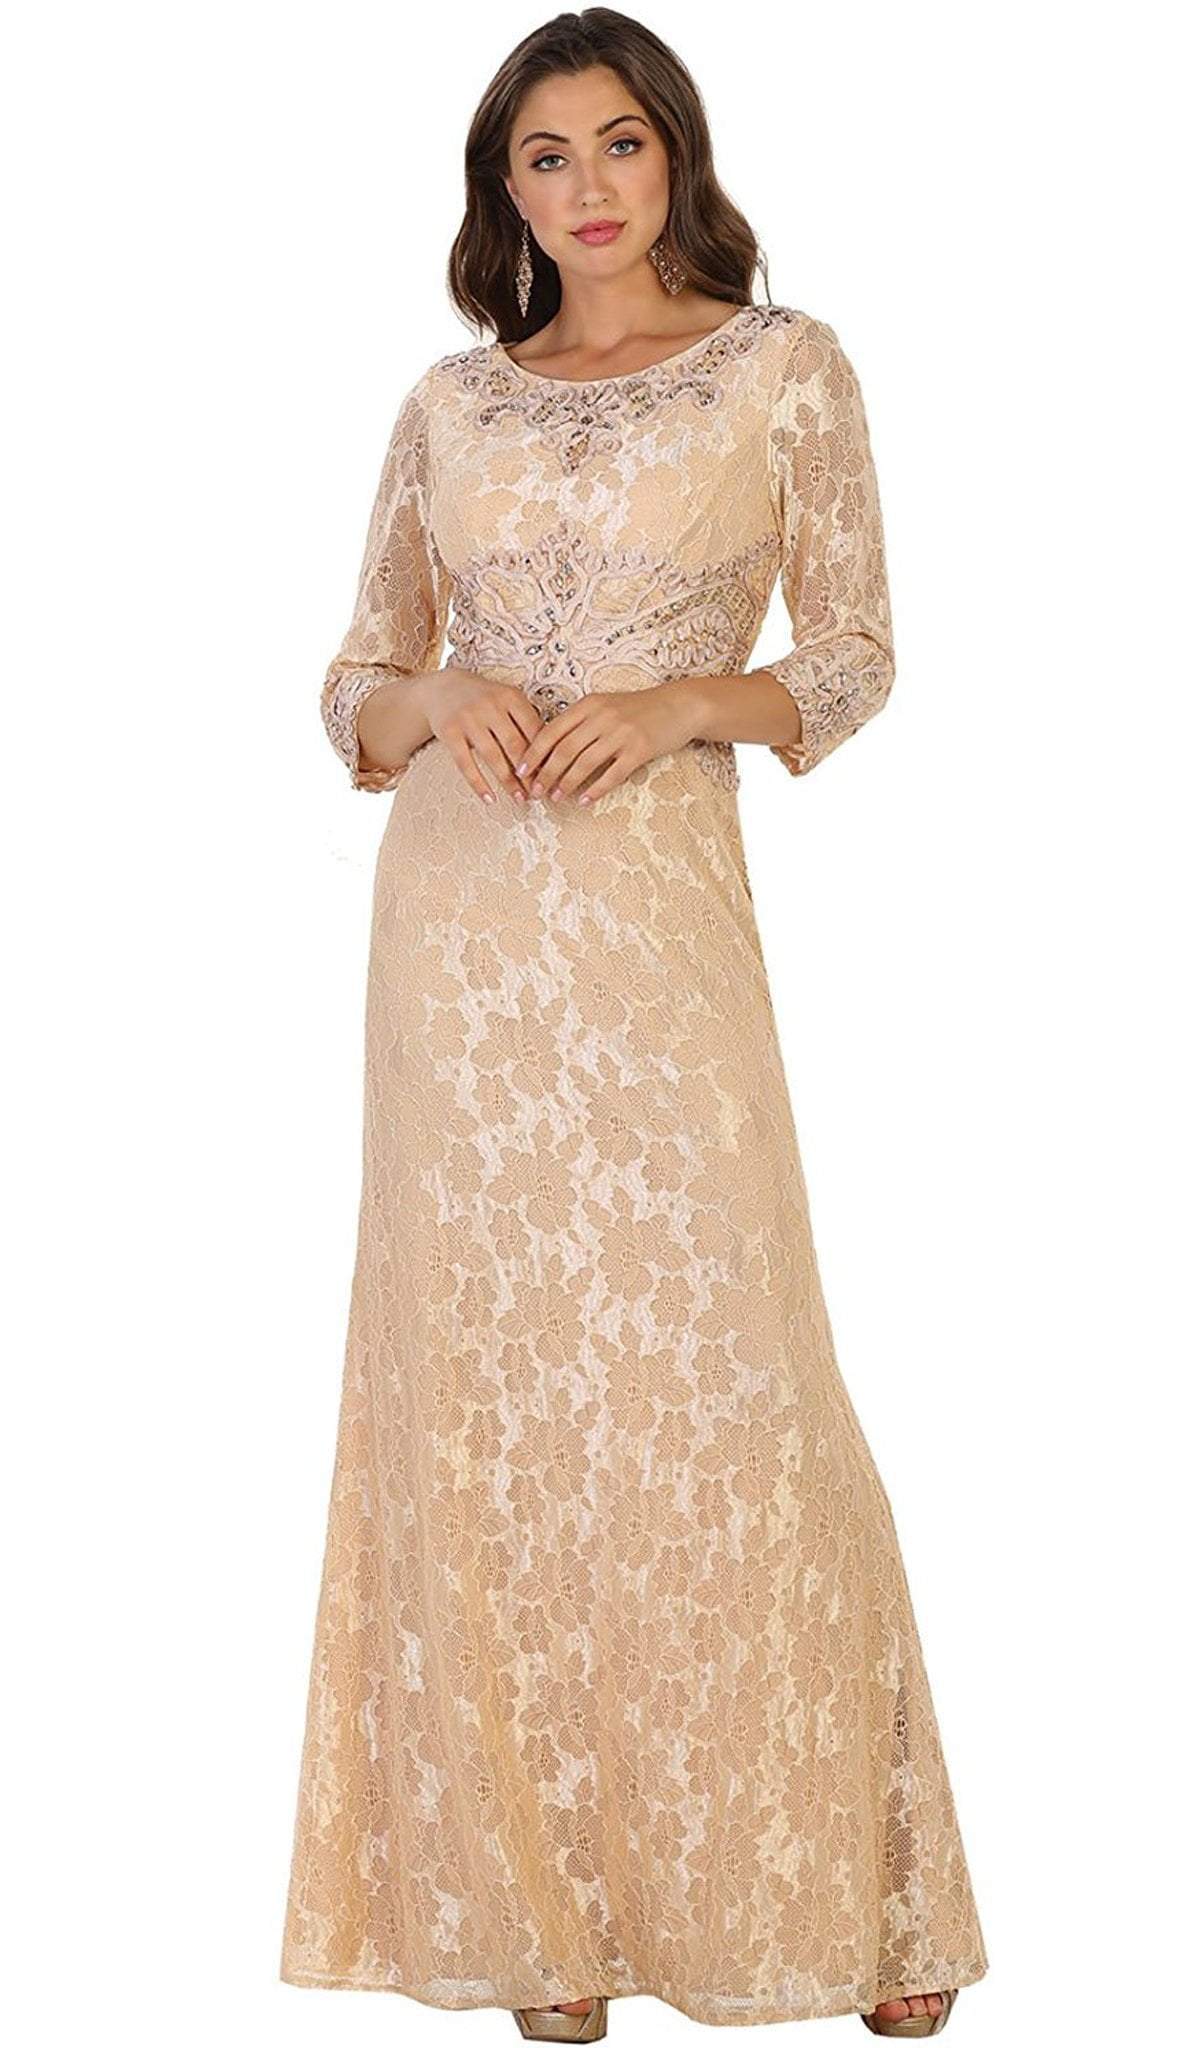 May Queen - Quarter Length Sleeve Lace Evening Dress Special Occasion Dress M / Champagne